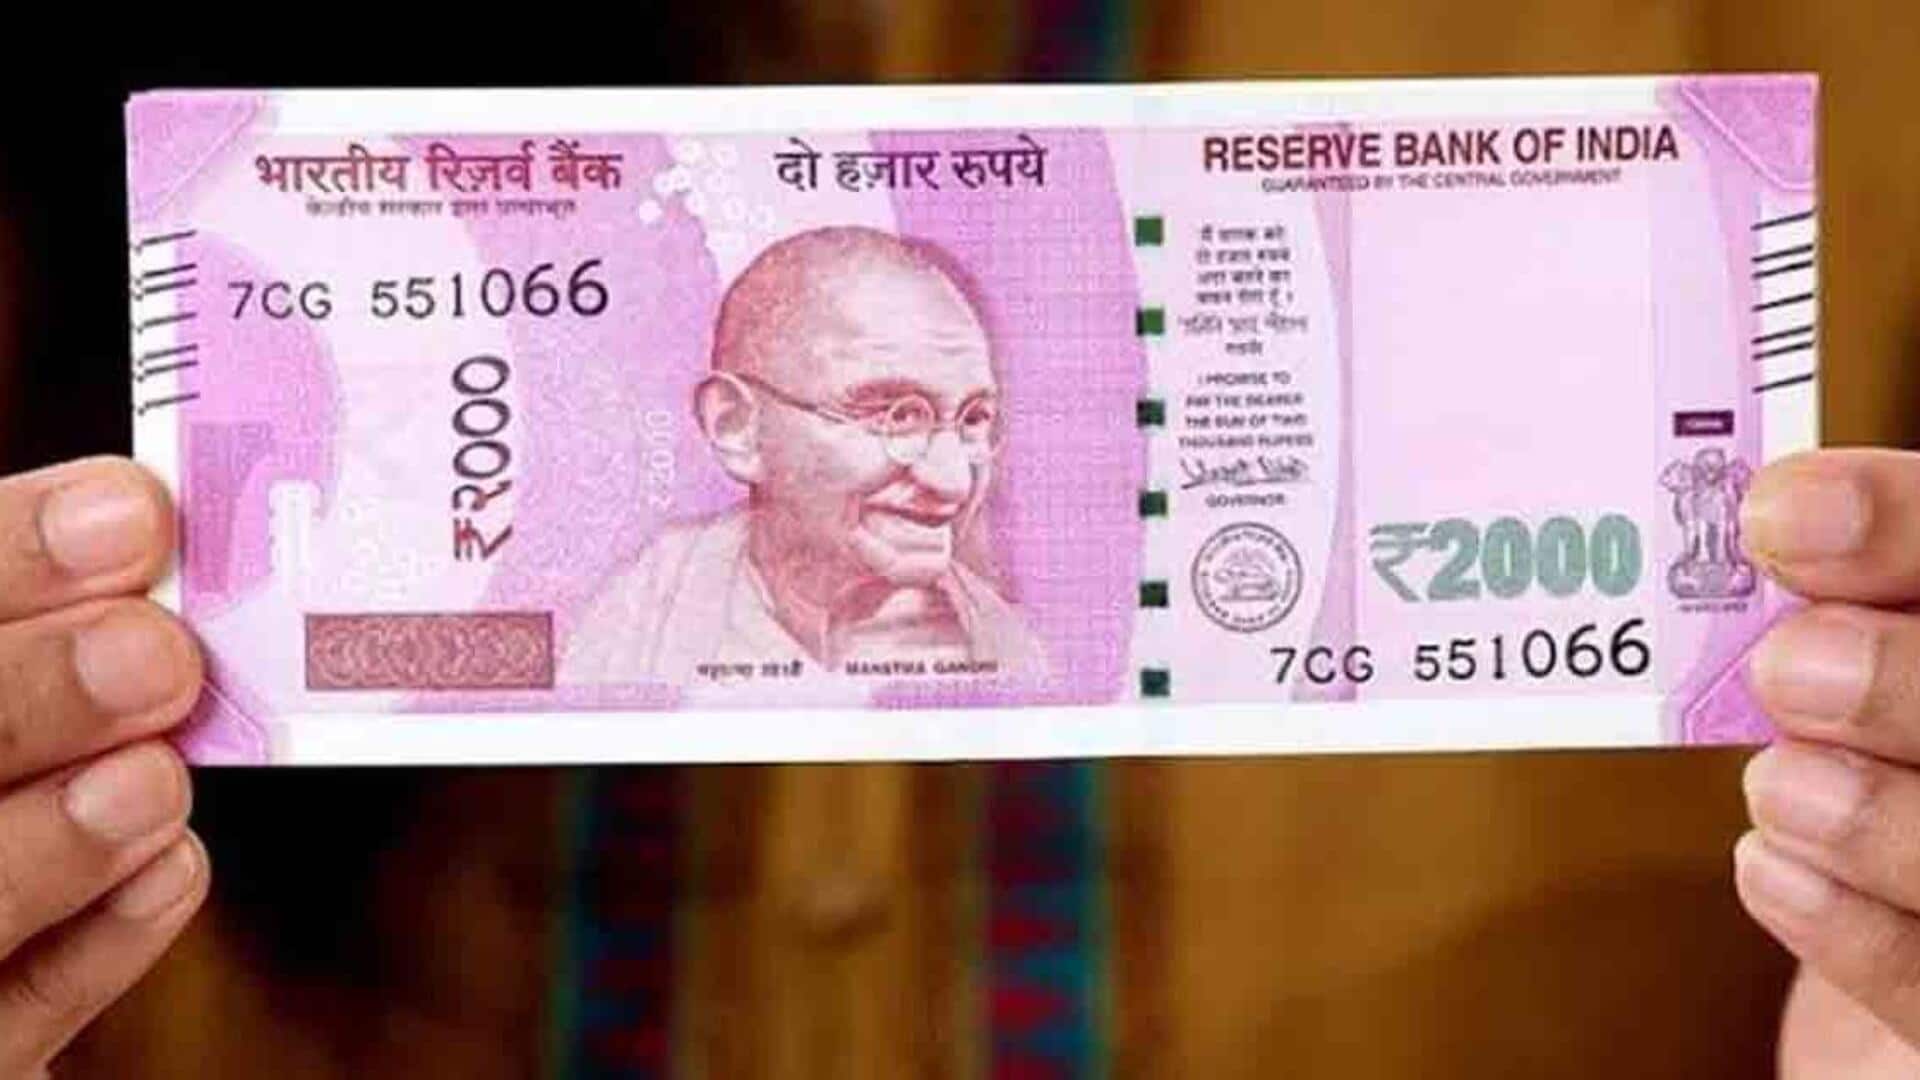 Over 97% of Rs. 2,000 banknotes returned to system: RBI